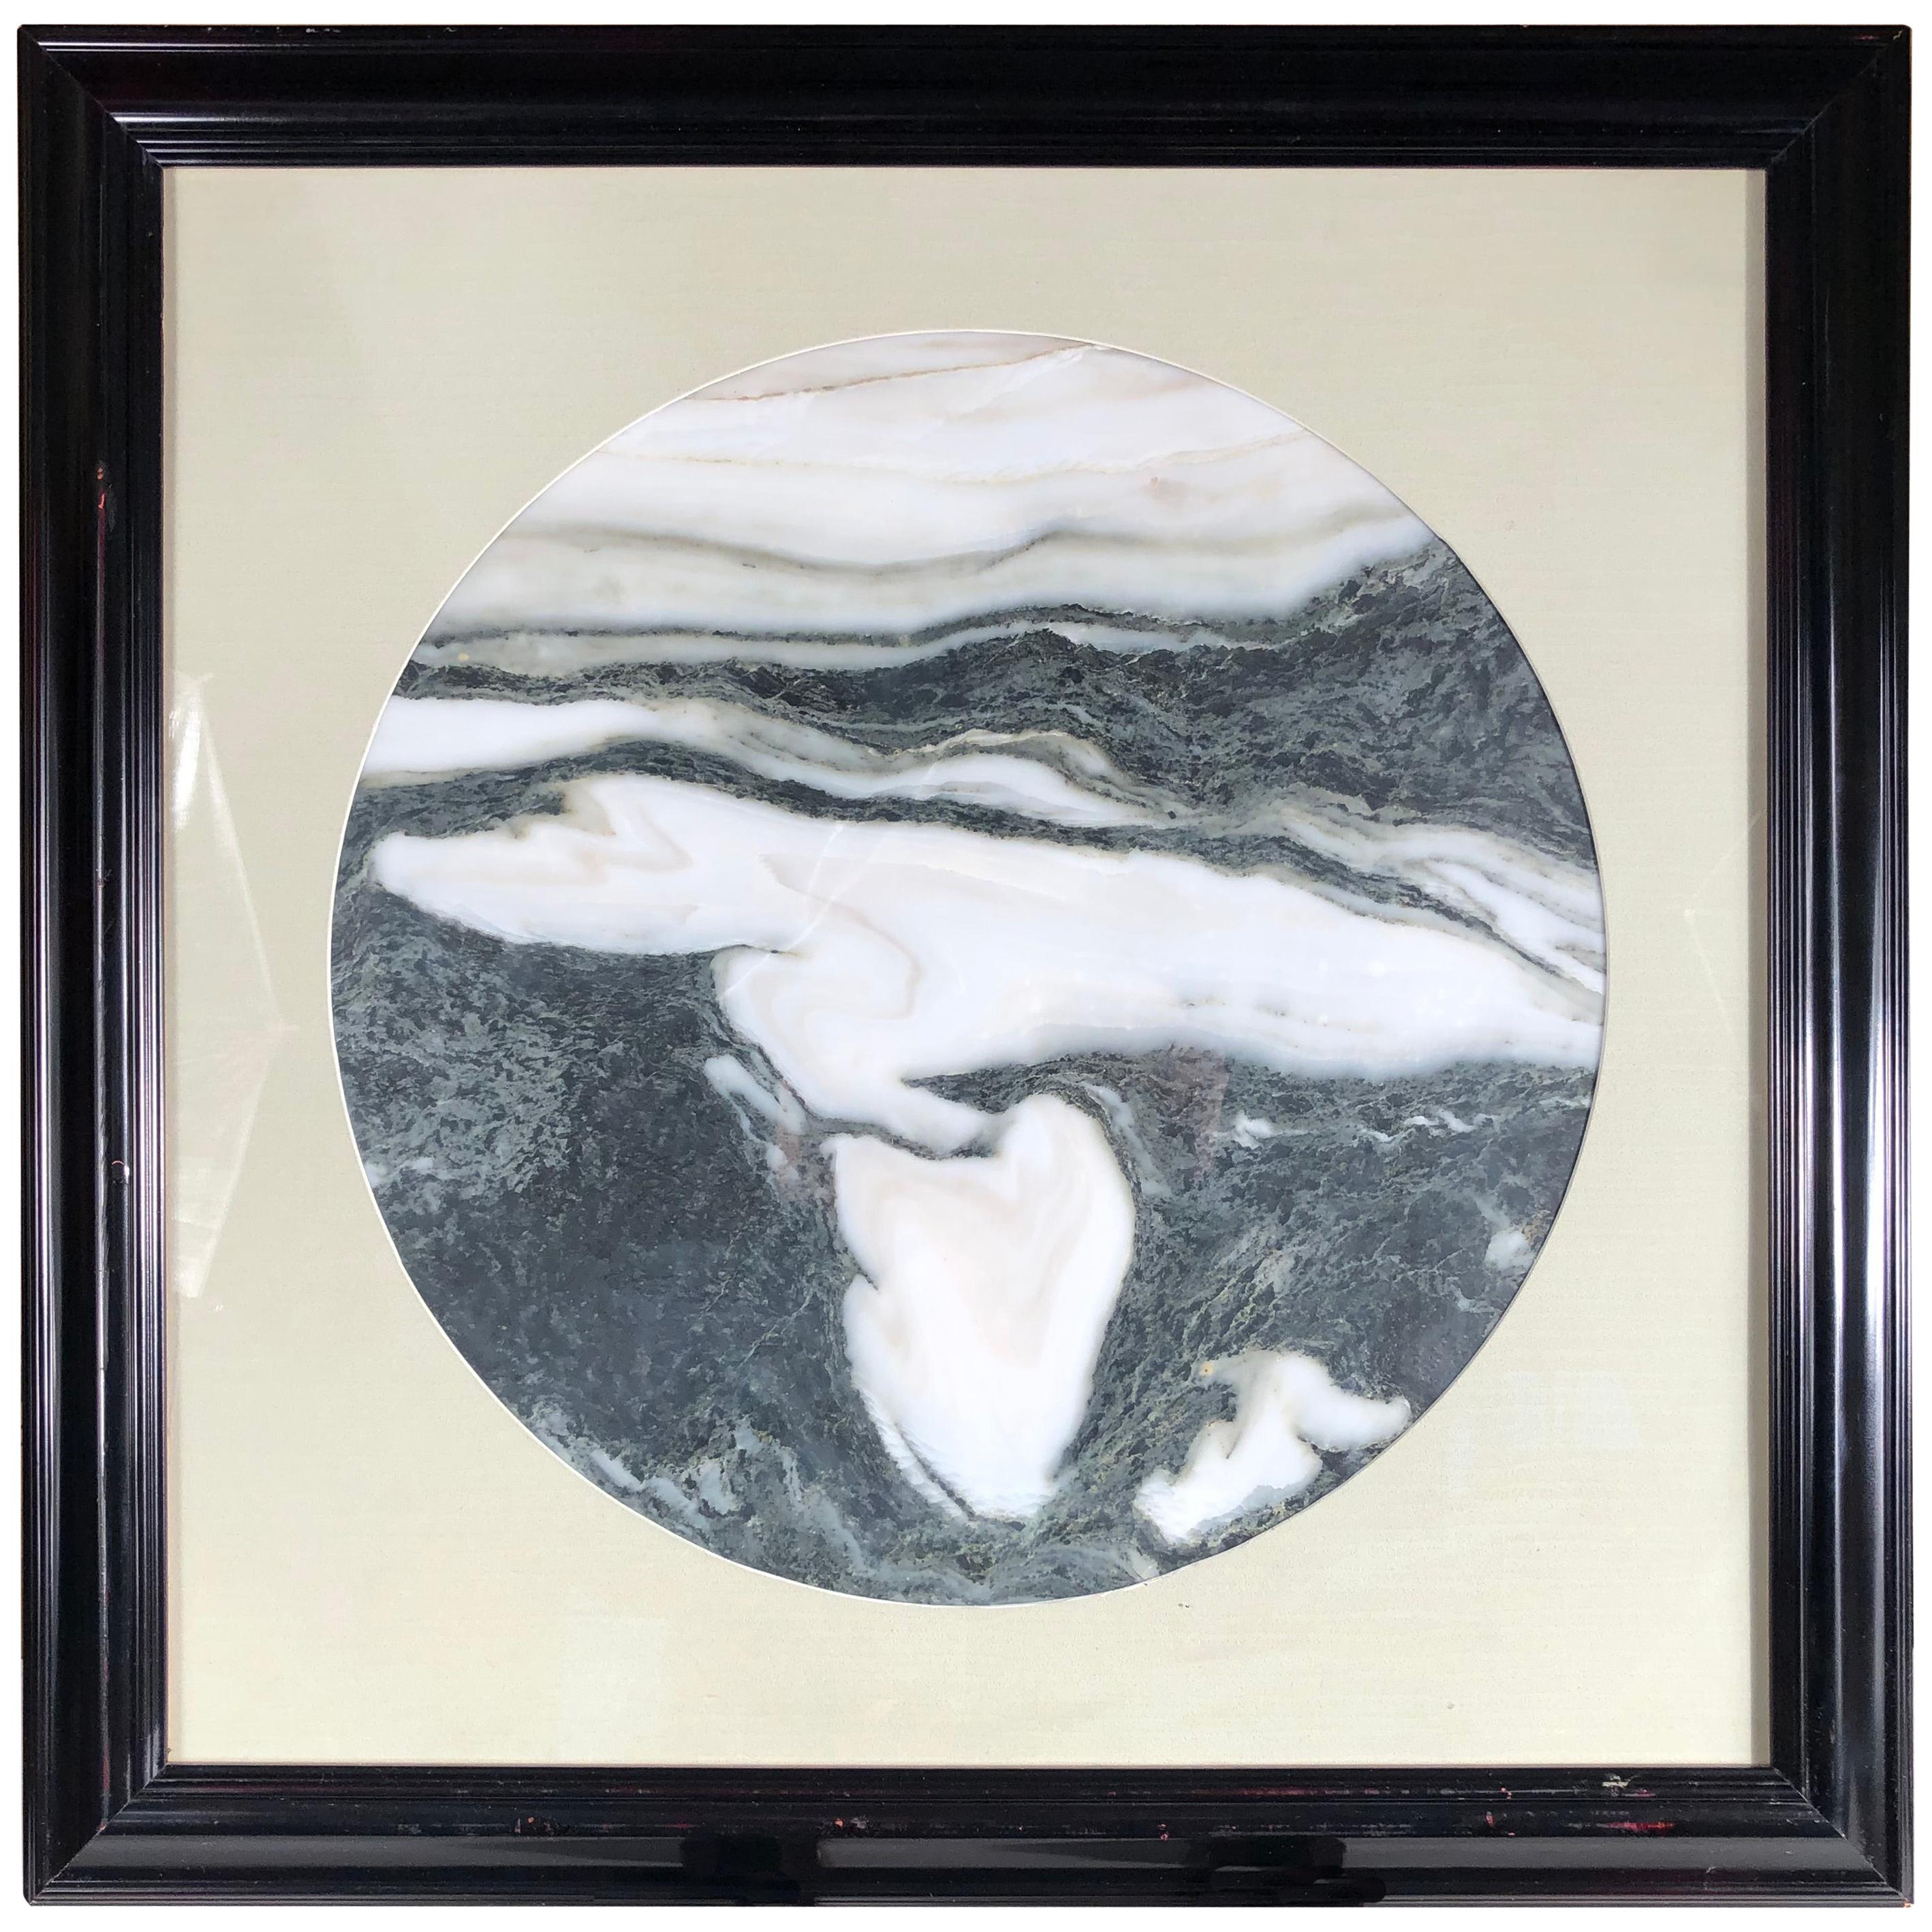 Chinese Extraordinary Natural Stone "Painting" Glacier Park For Sale